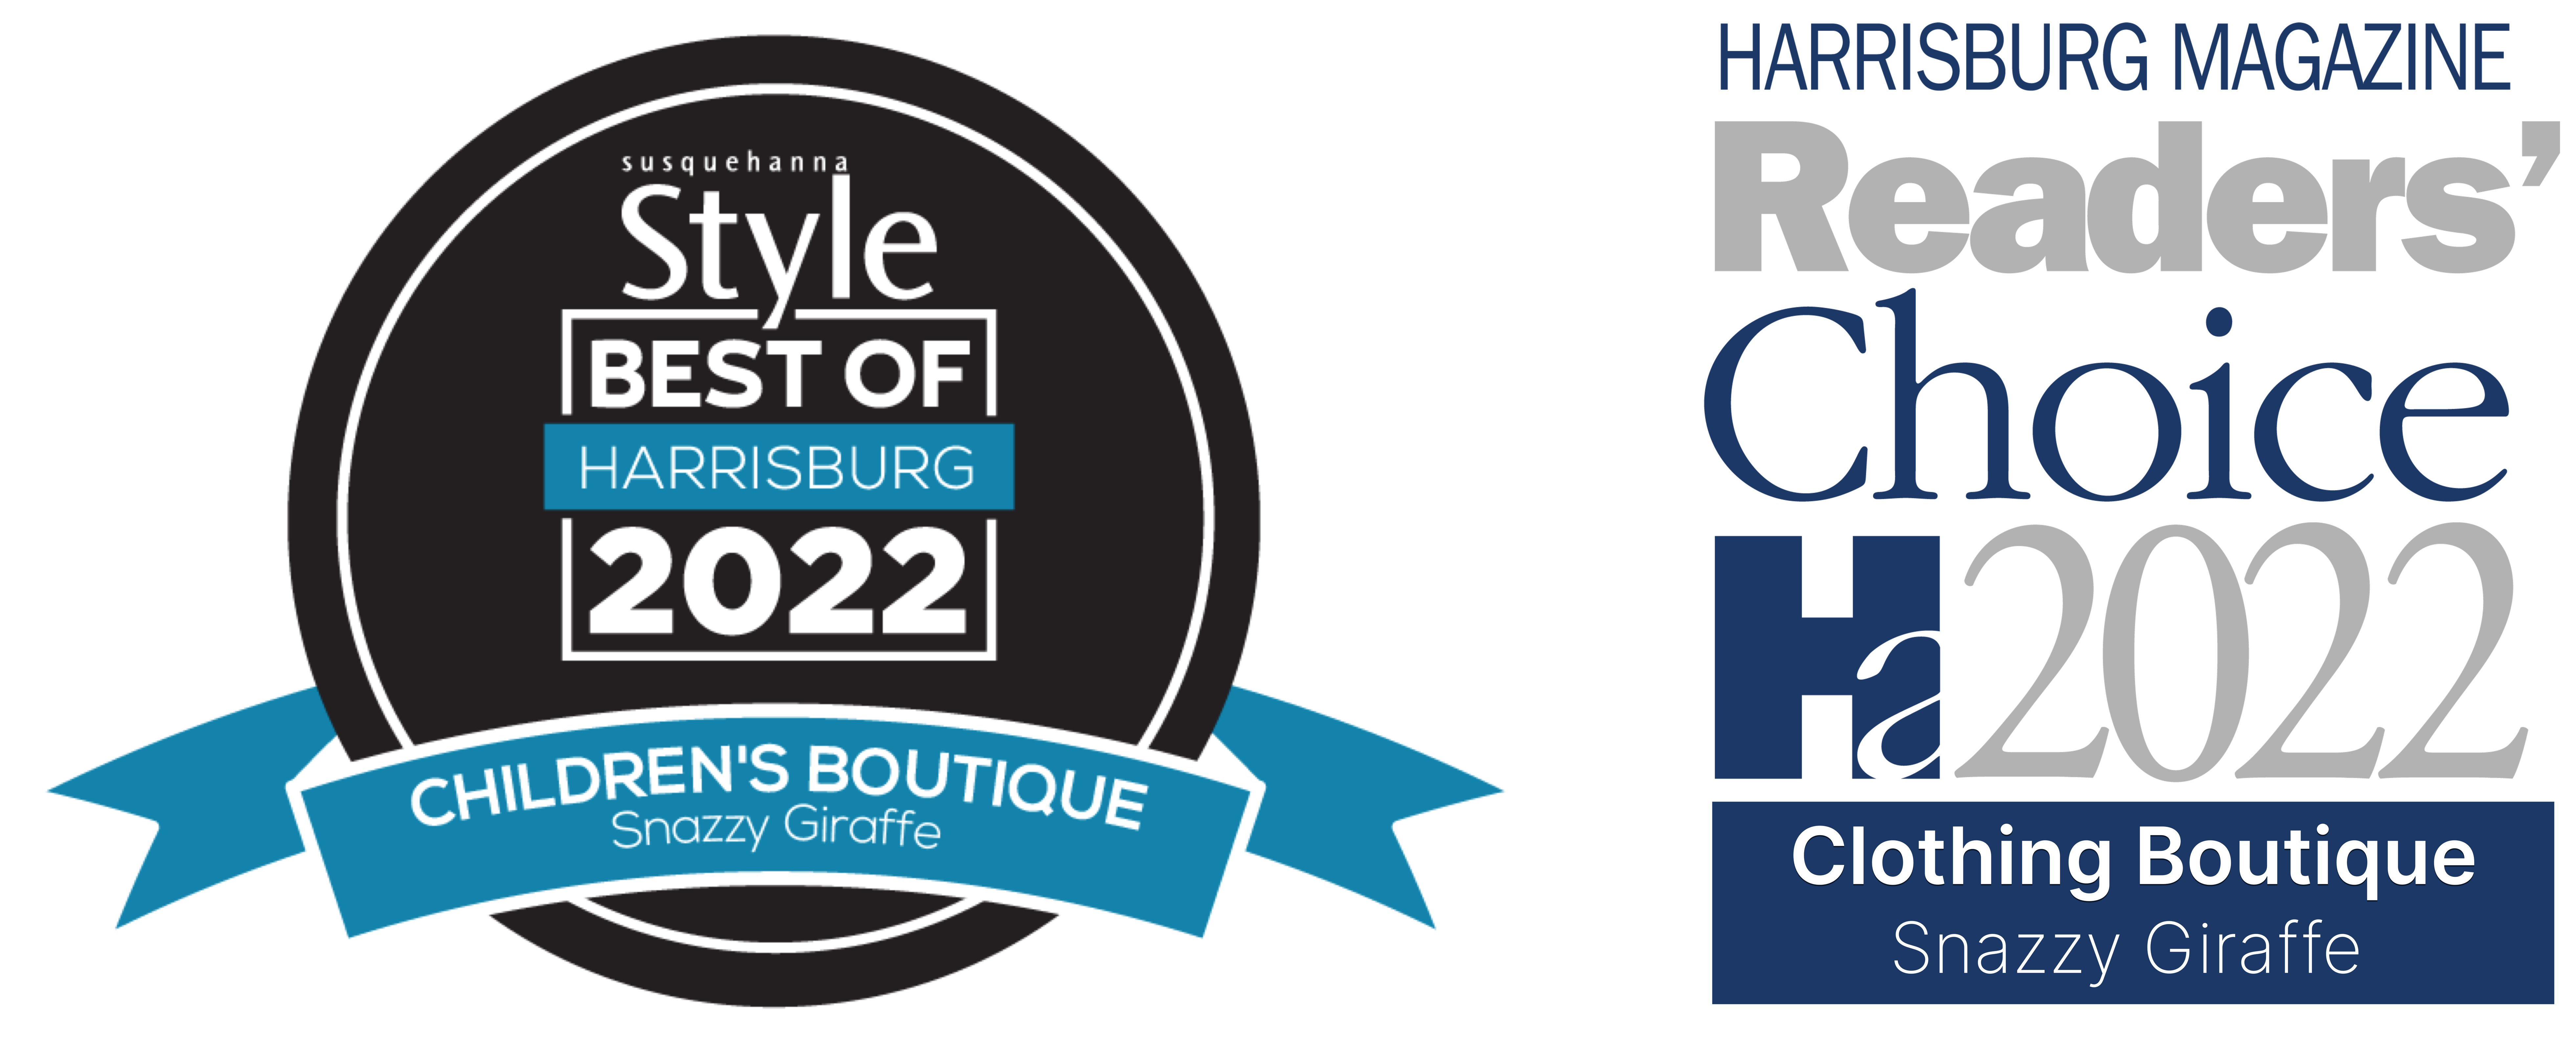 Thank you for voting Snazzy Giraffe the Best Children's Boutique